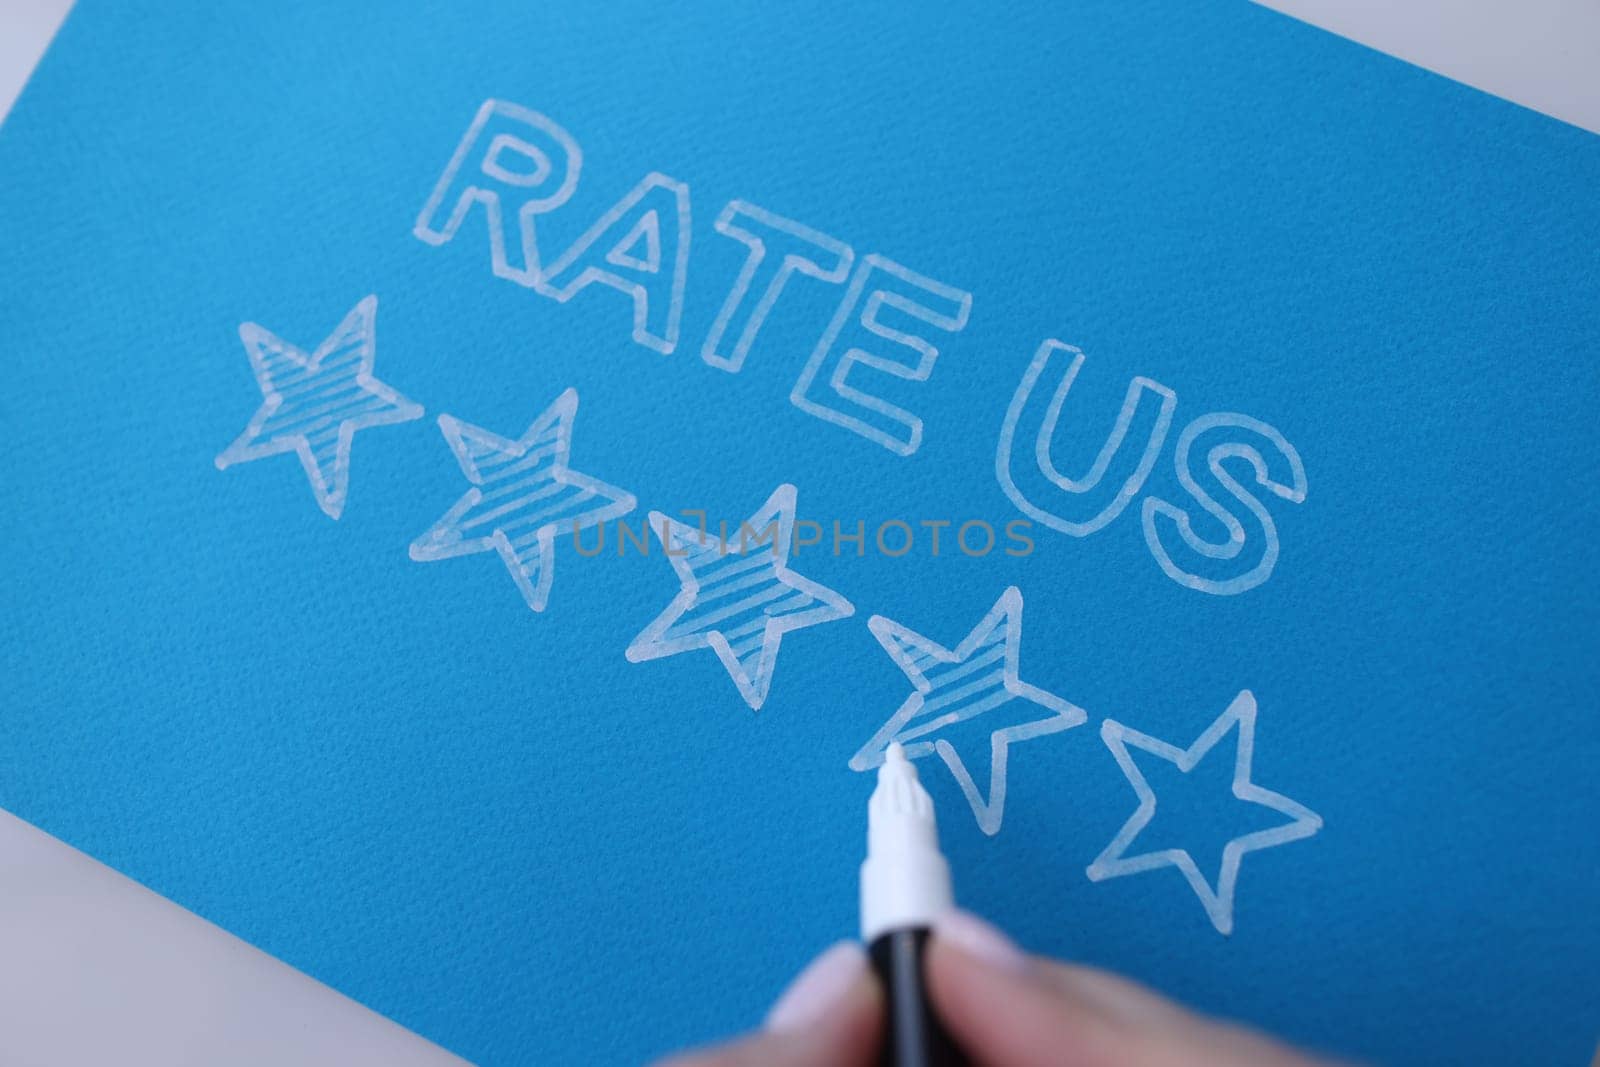 Handwritten review rate us and star rating on blue background. Customer feedback and service recommendation concept